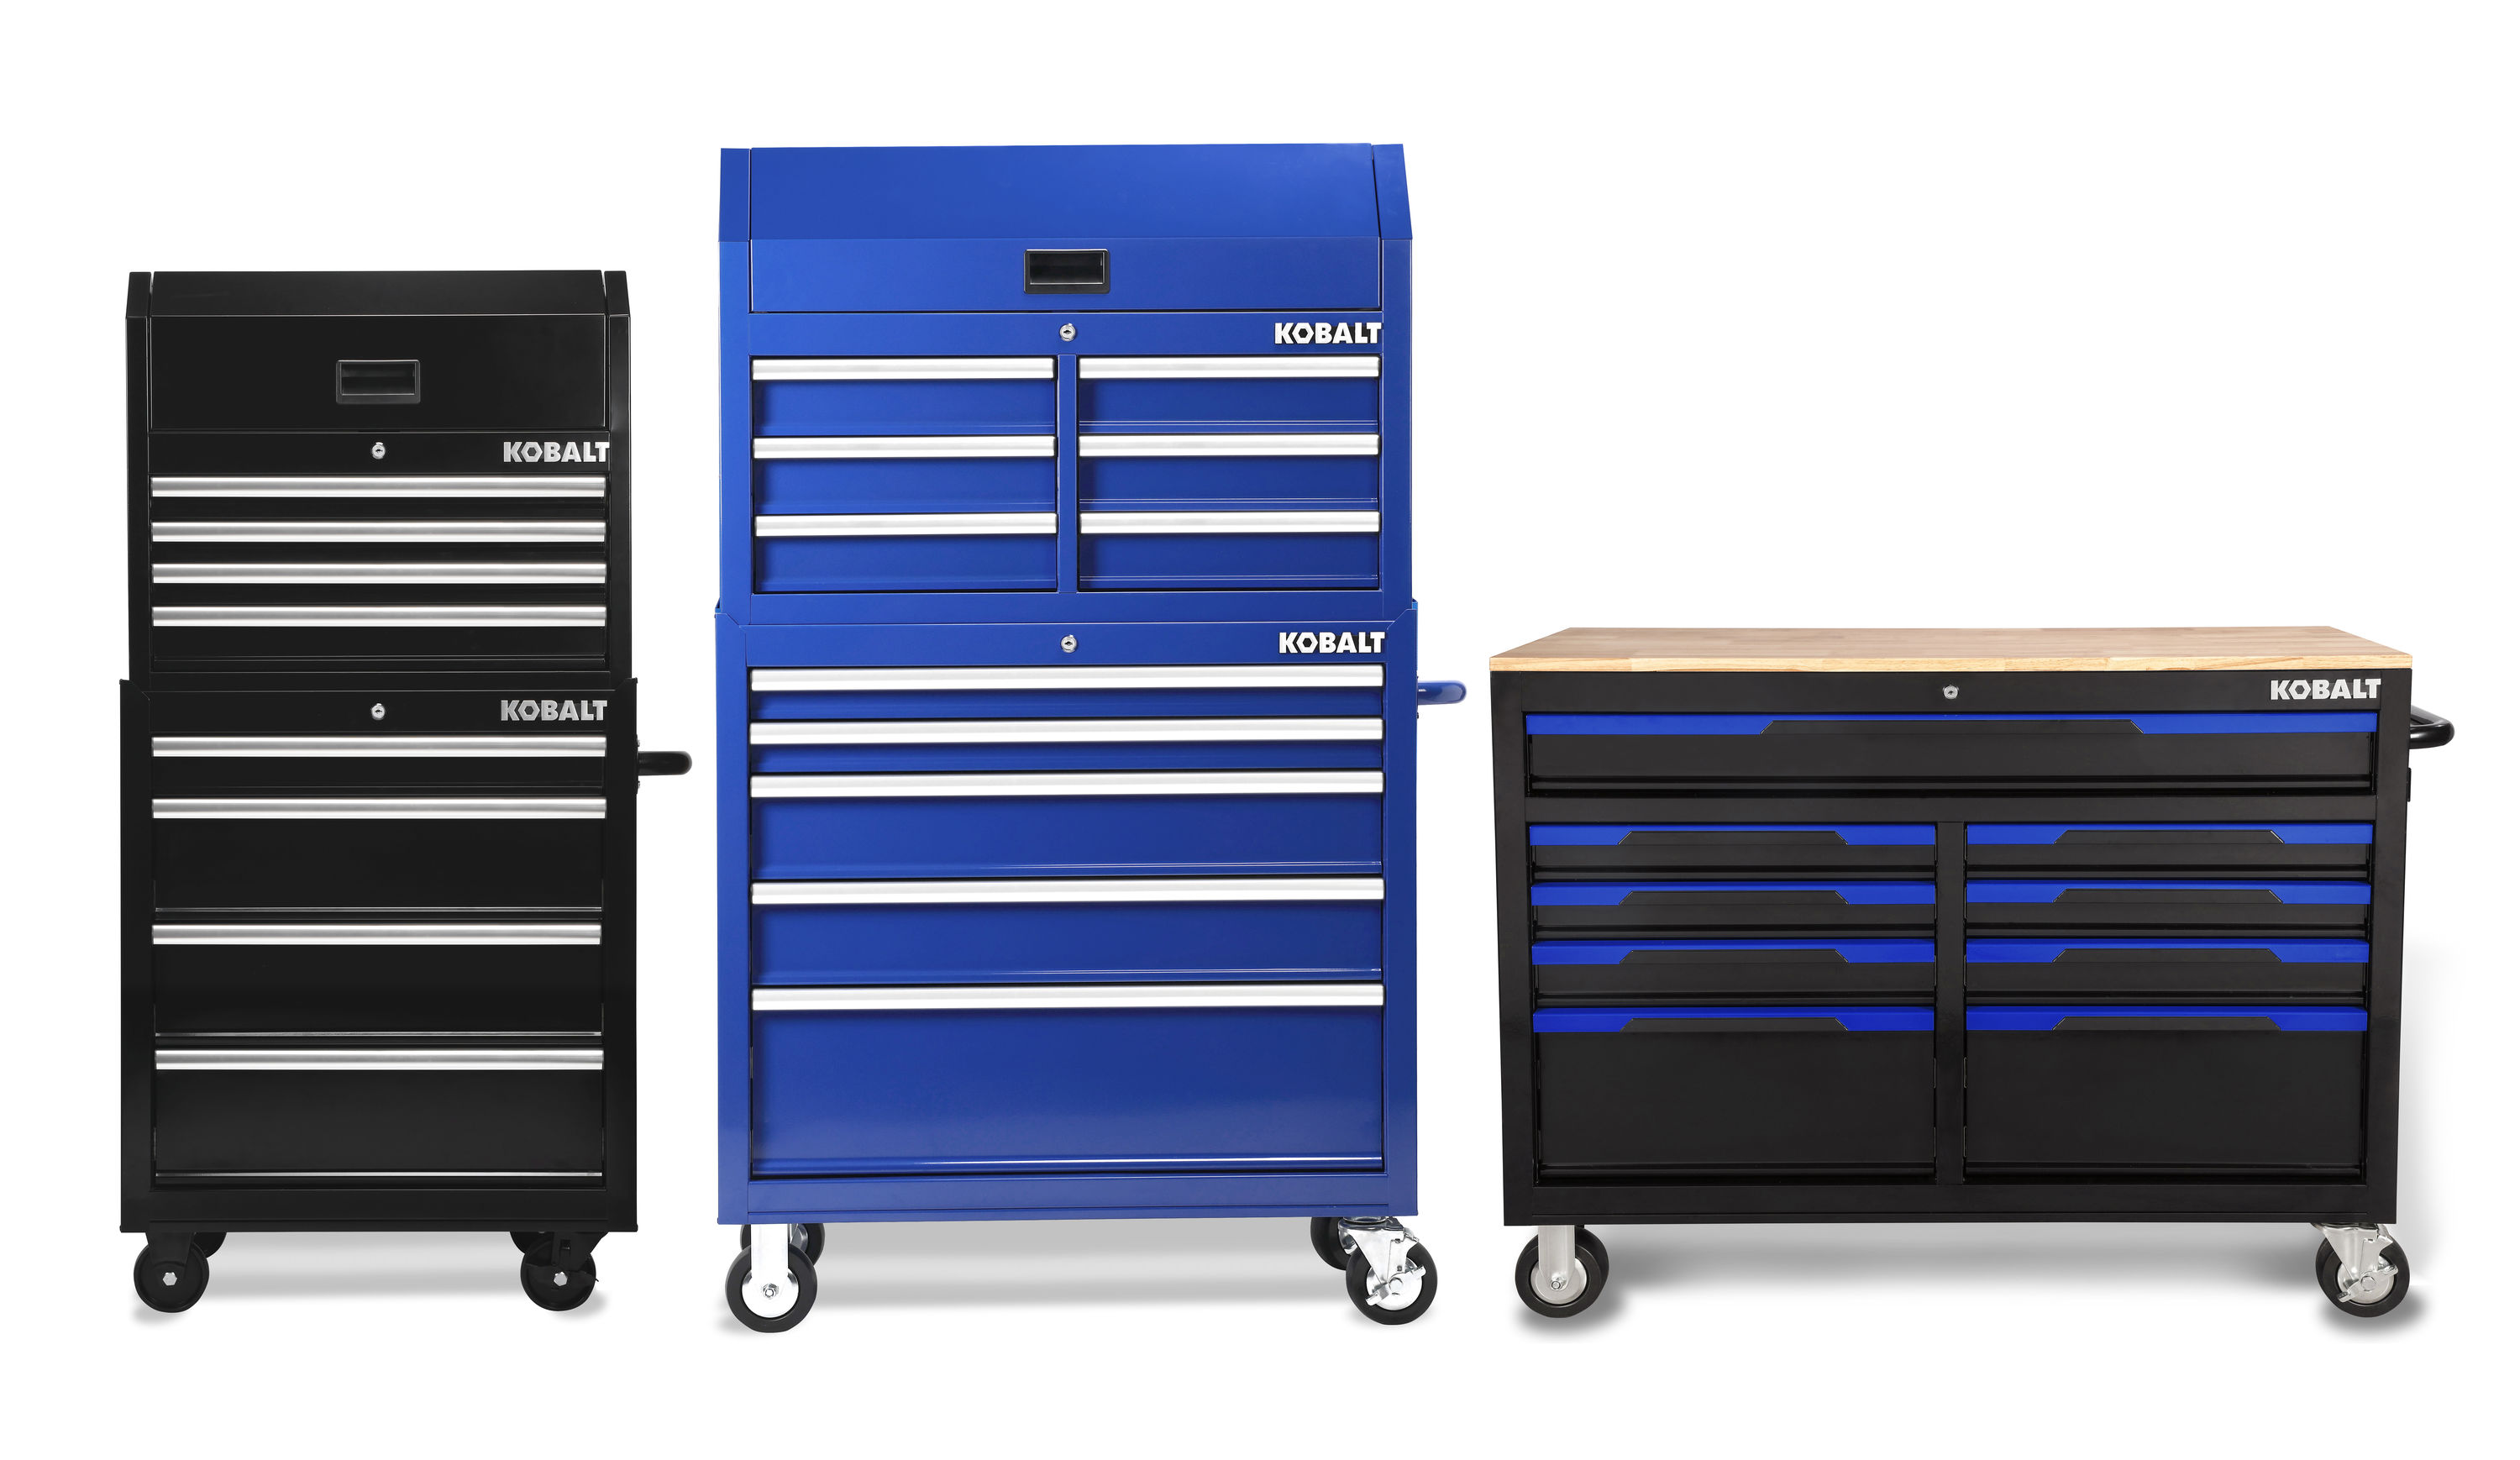 Kobalt 36-in W x 37.8-in H 5-Drawer Steel Rolling Tool Cabinet (Blue) at